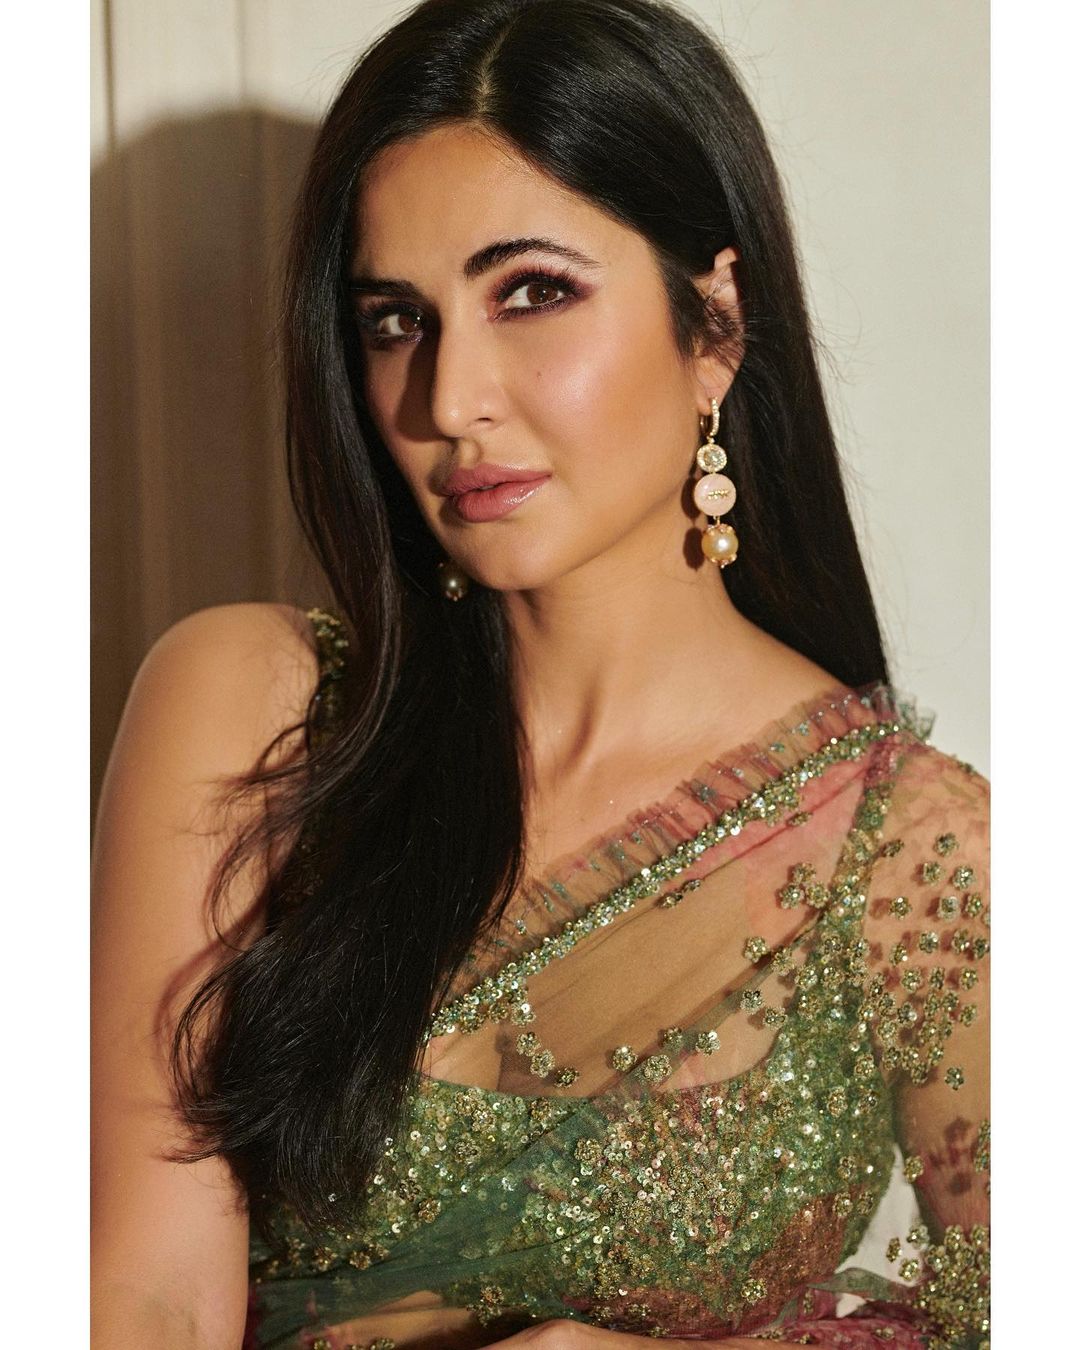 Katrina Kaif is always a pretty sight when wearing sarees. Scroll ahead to take a look.